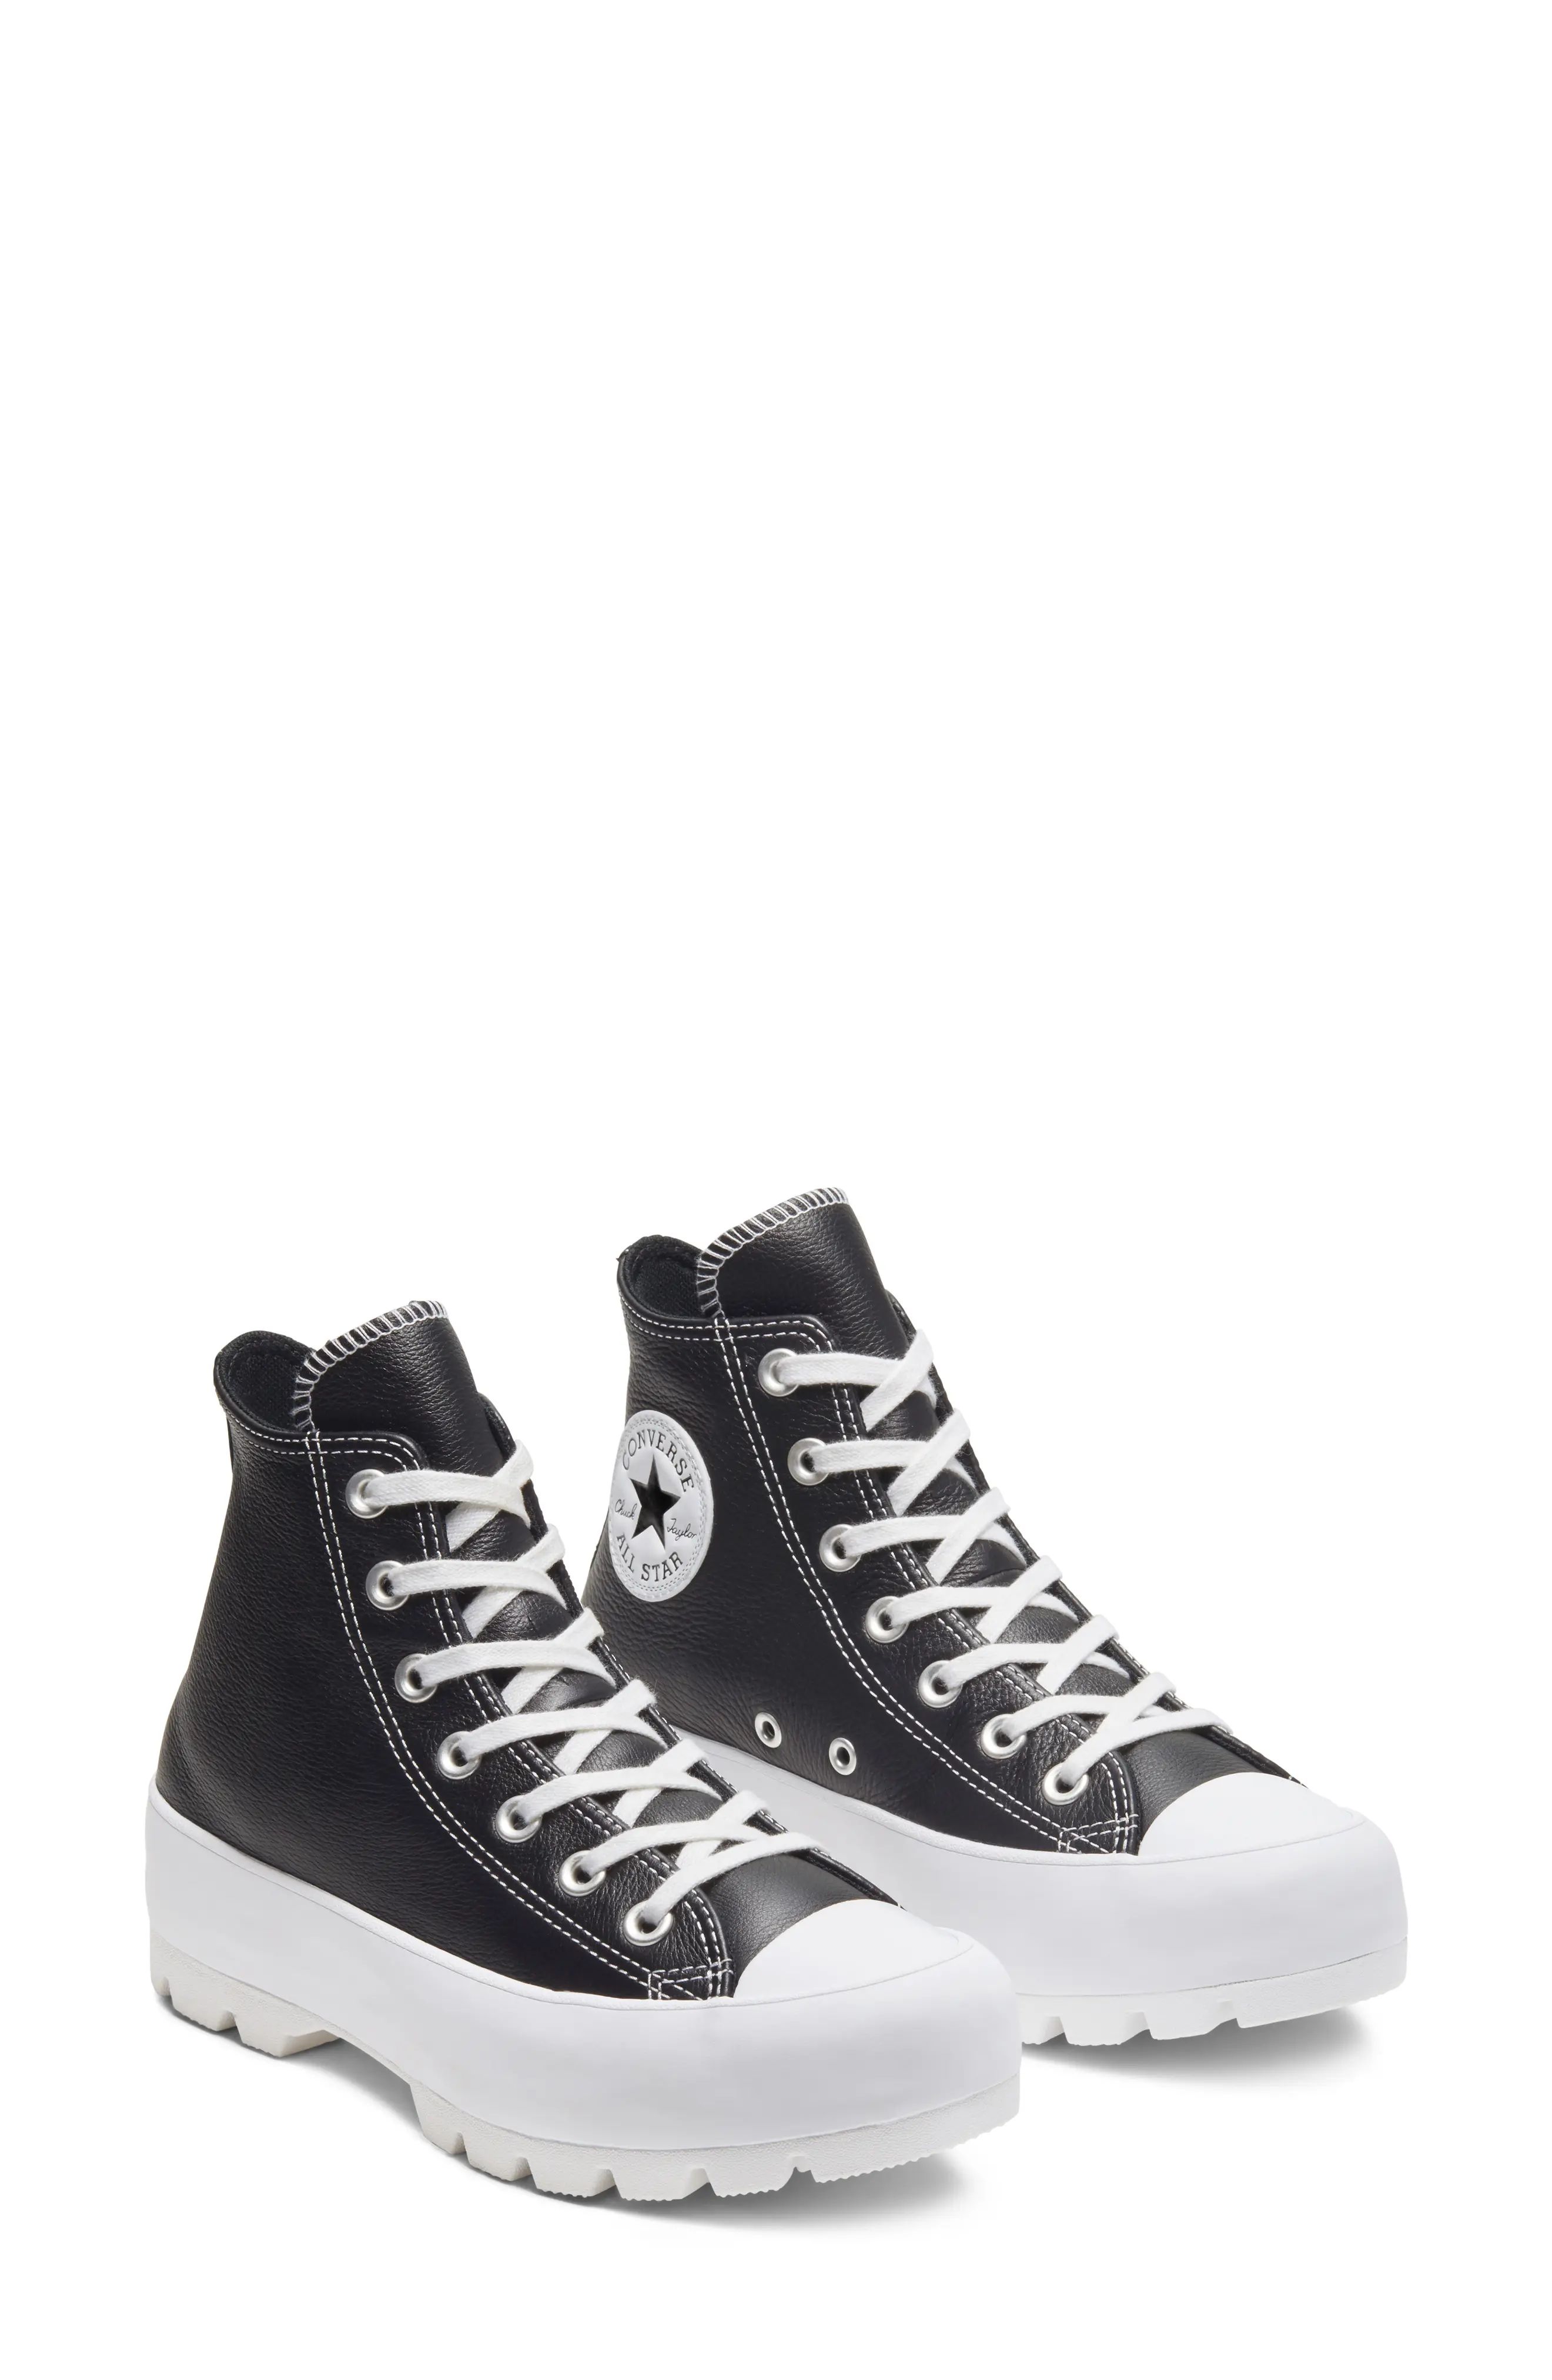 Women's Converse Chuck Taylor All Star Lugged High Top Sneaker | Nordstrom